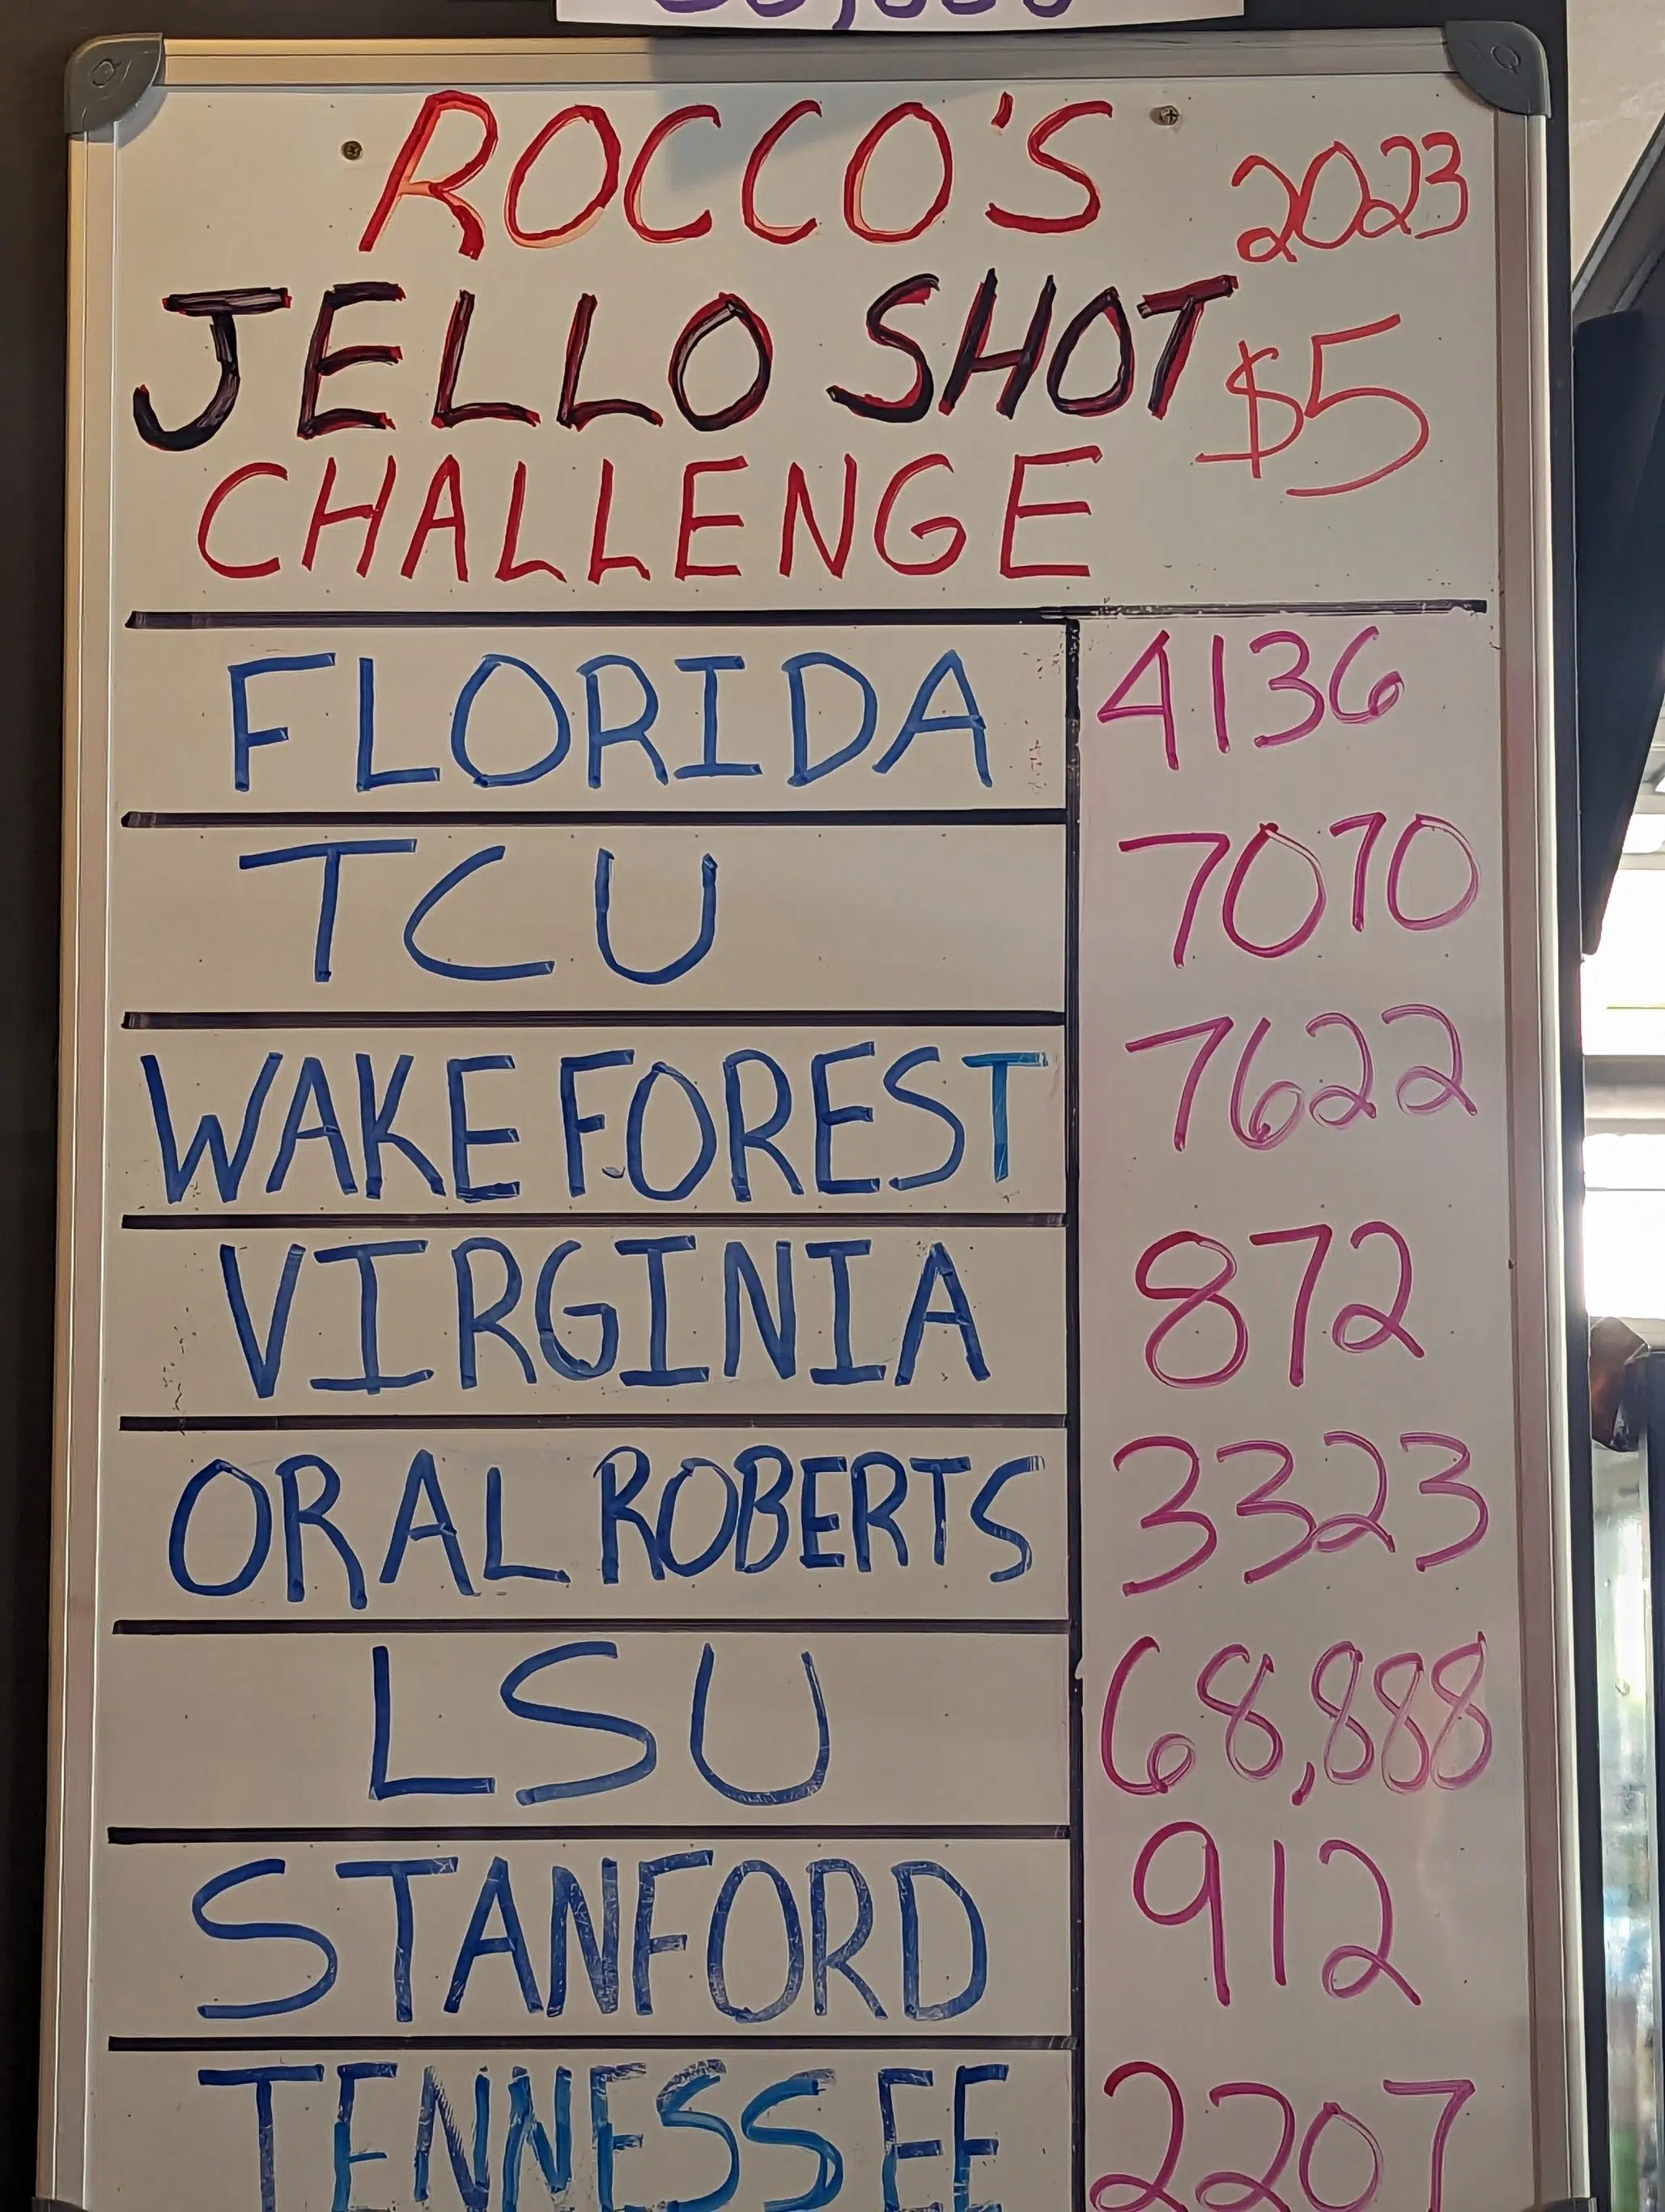 LSU food bank to receive $60,000 from the Jell-O shot challenge